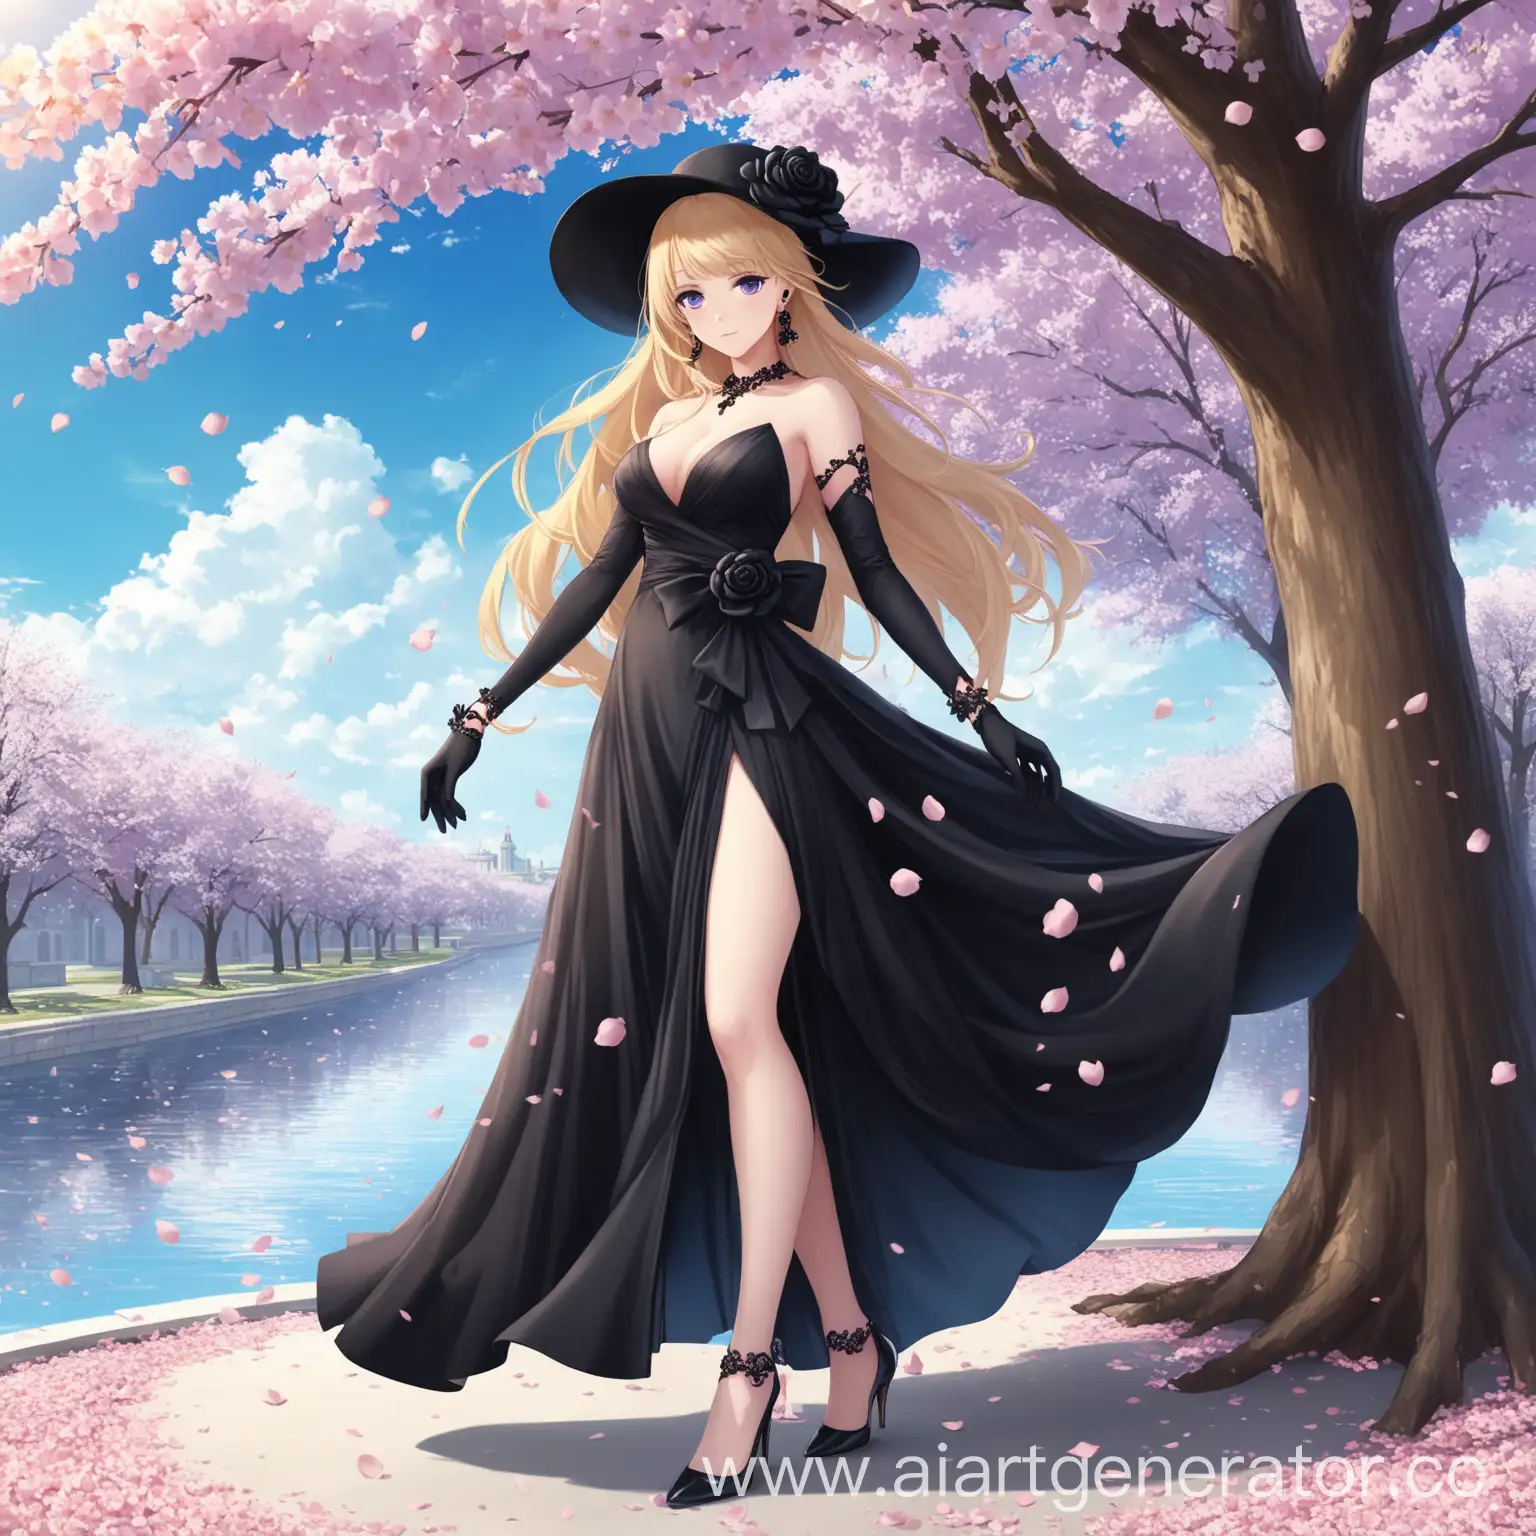 Elegant-Woman-in-Black-Dress-with-Rose-and-Hat-Standing-by-Cherry-Blossom-Tree